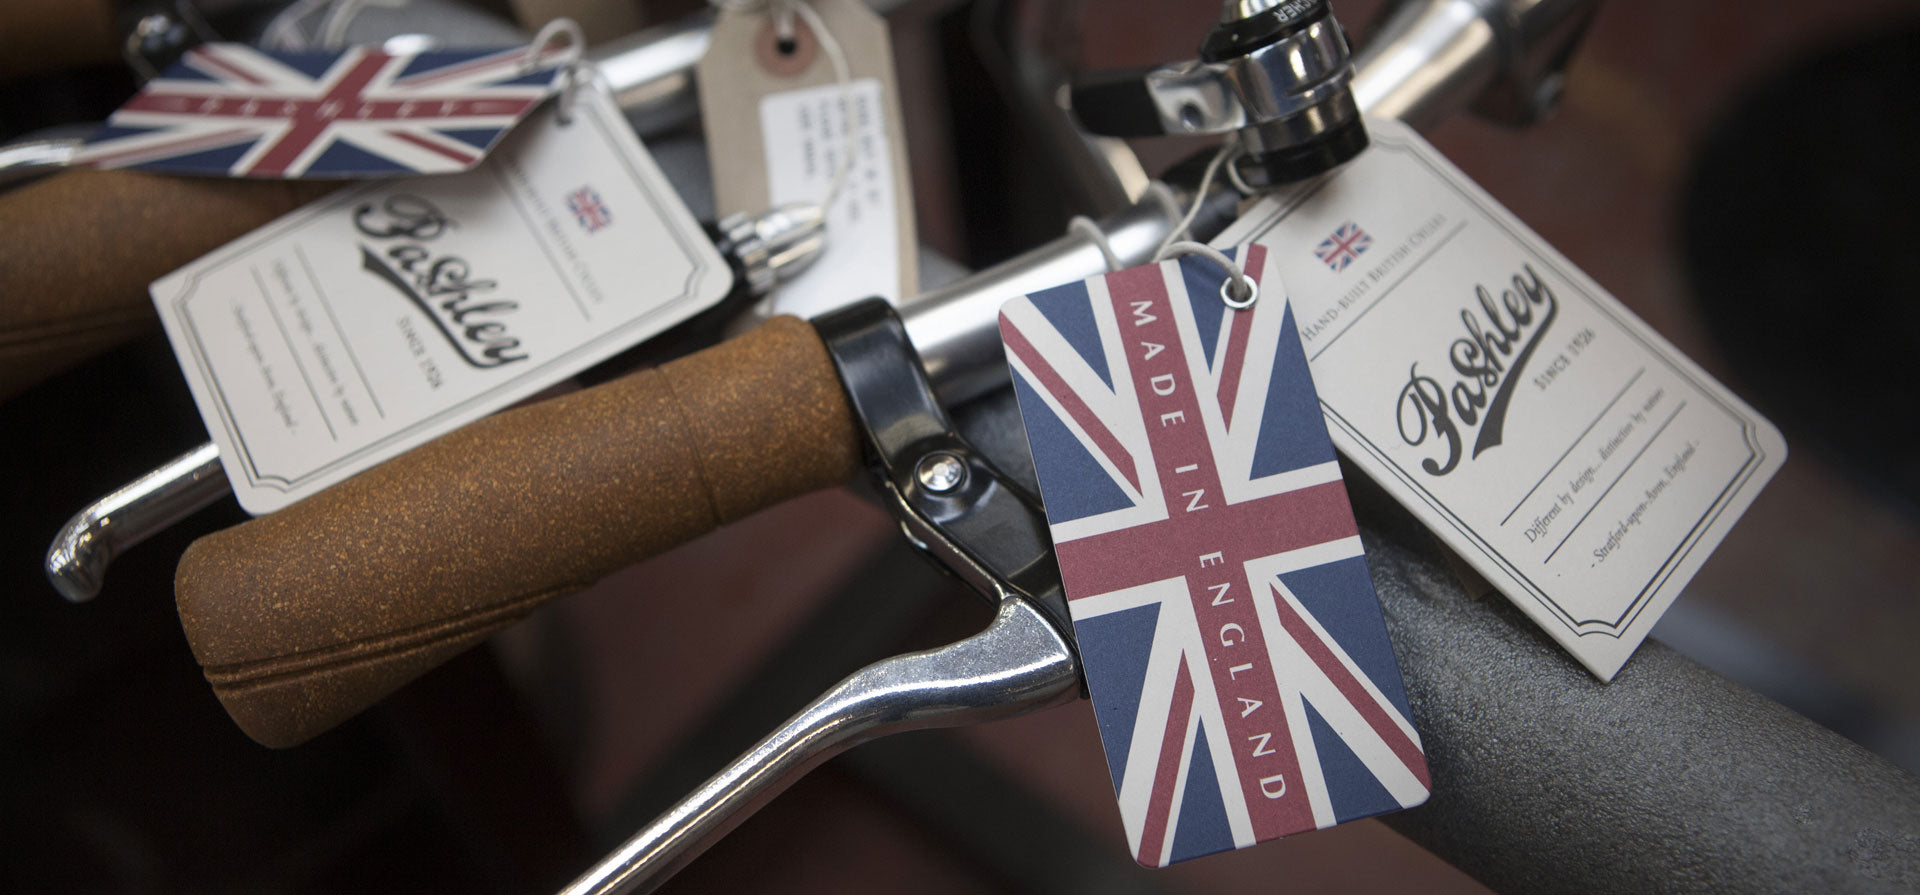 Pashley union jack swing tickets hanging from bicycle handlebars.